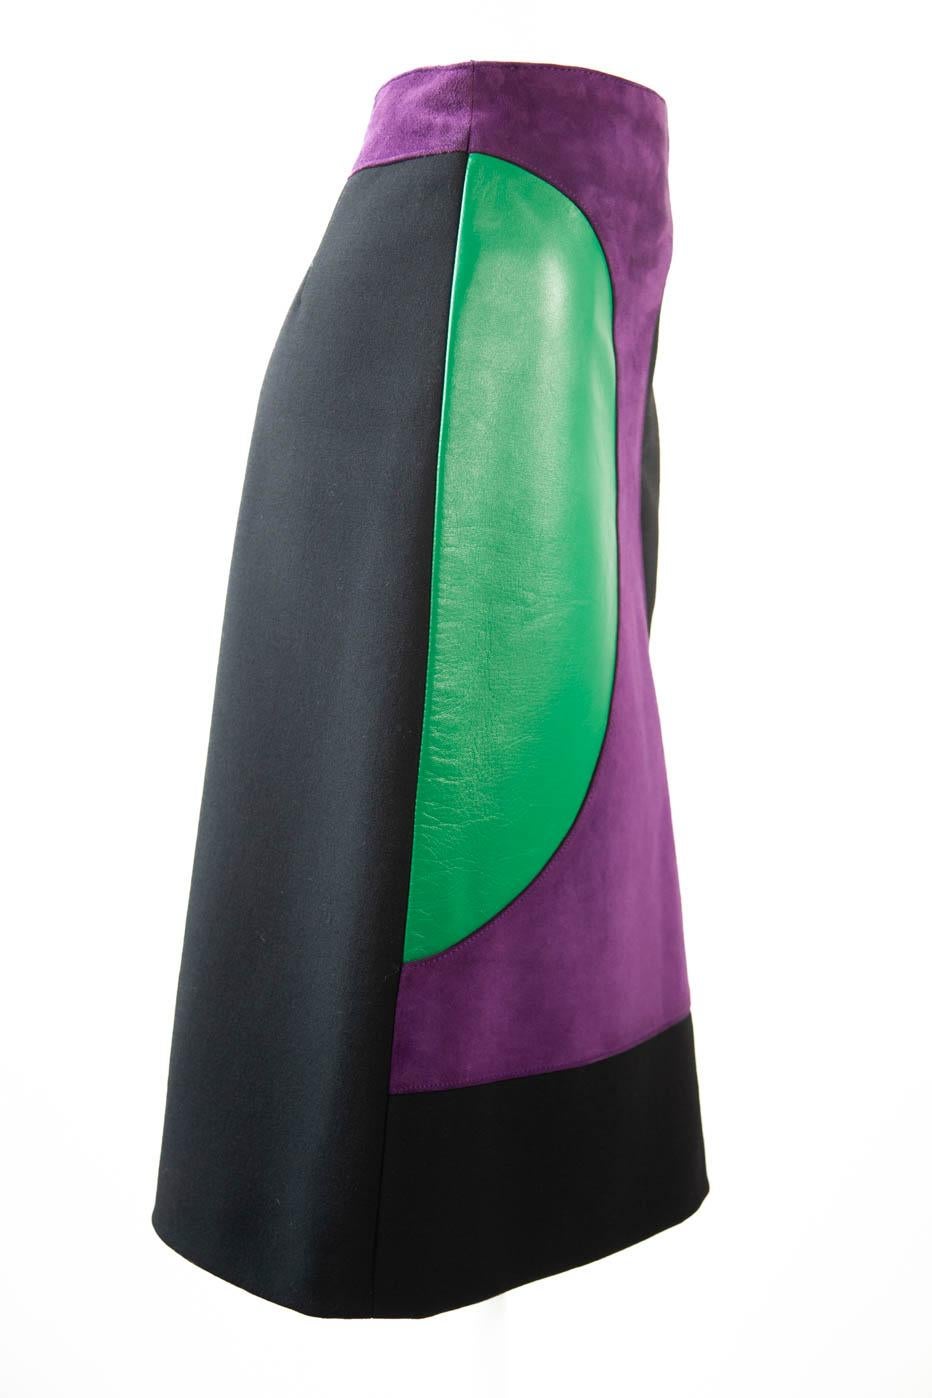 Pierre Cardin Space Age 1960's color block mod pattern purple suede, green leather, A-line skirt. Made of structured wool. Closes with a back zipper and is fully lined.